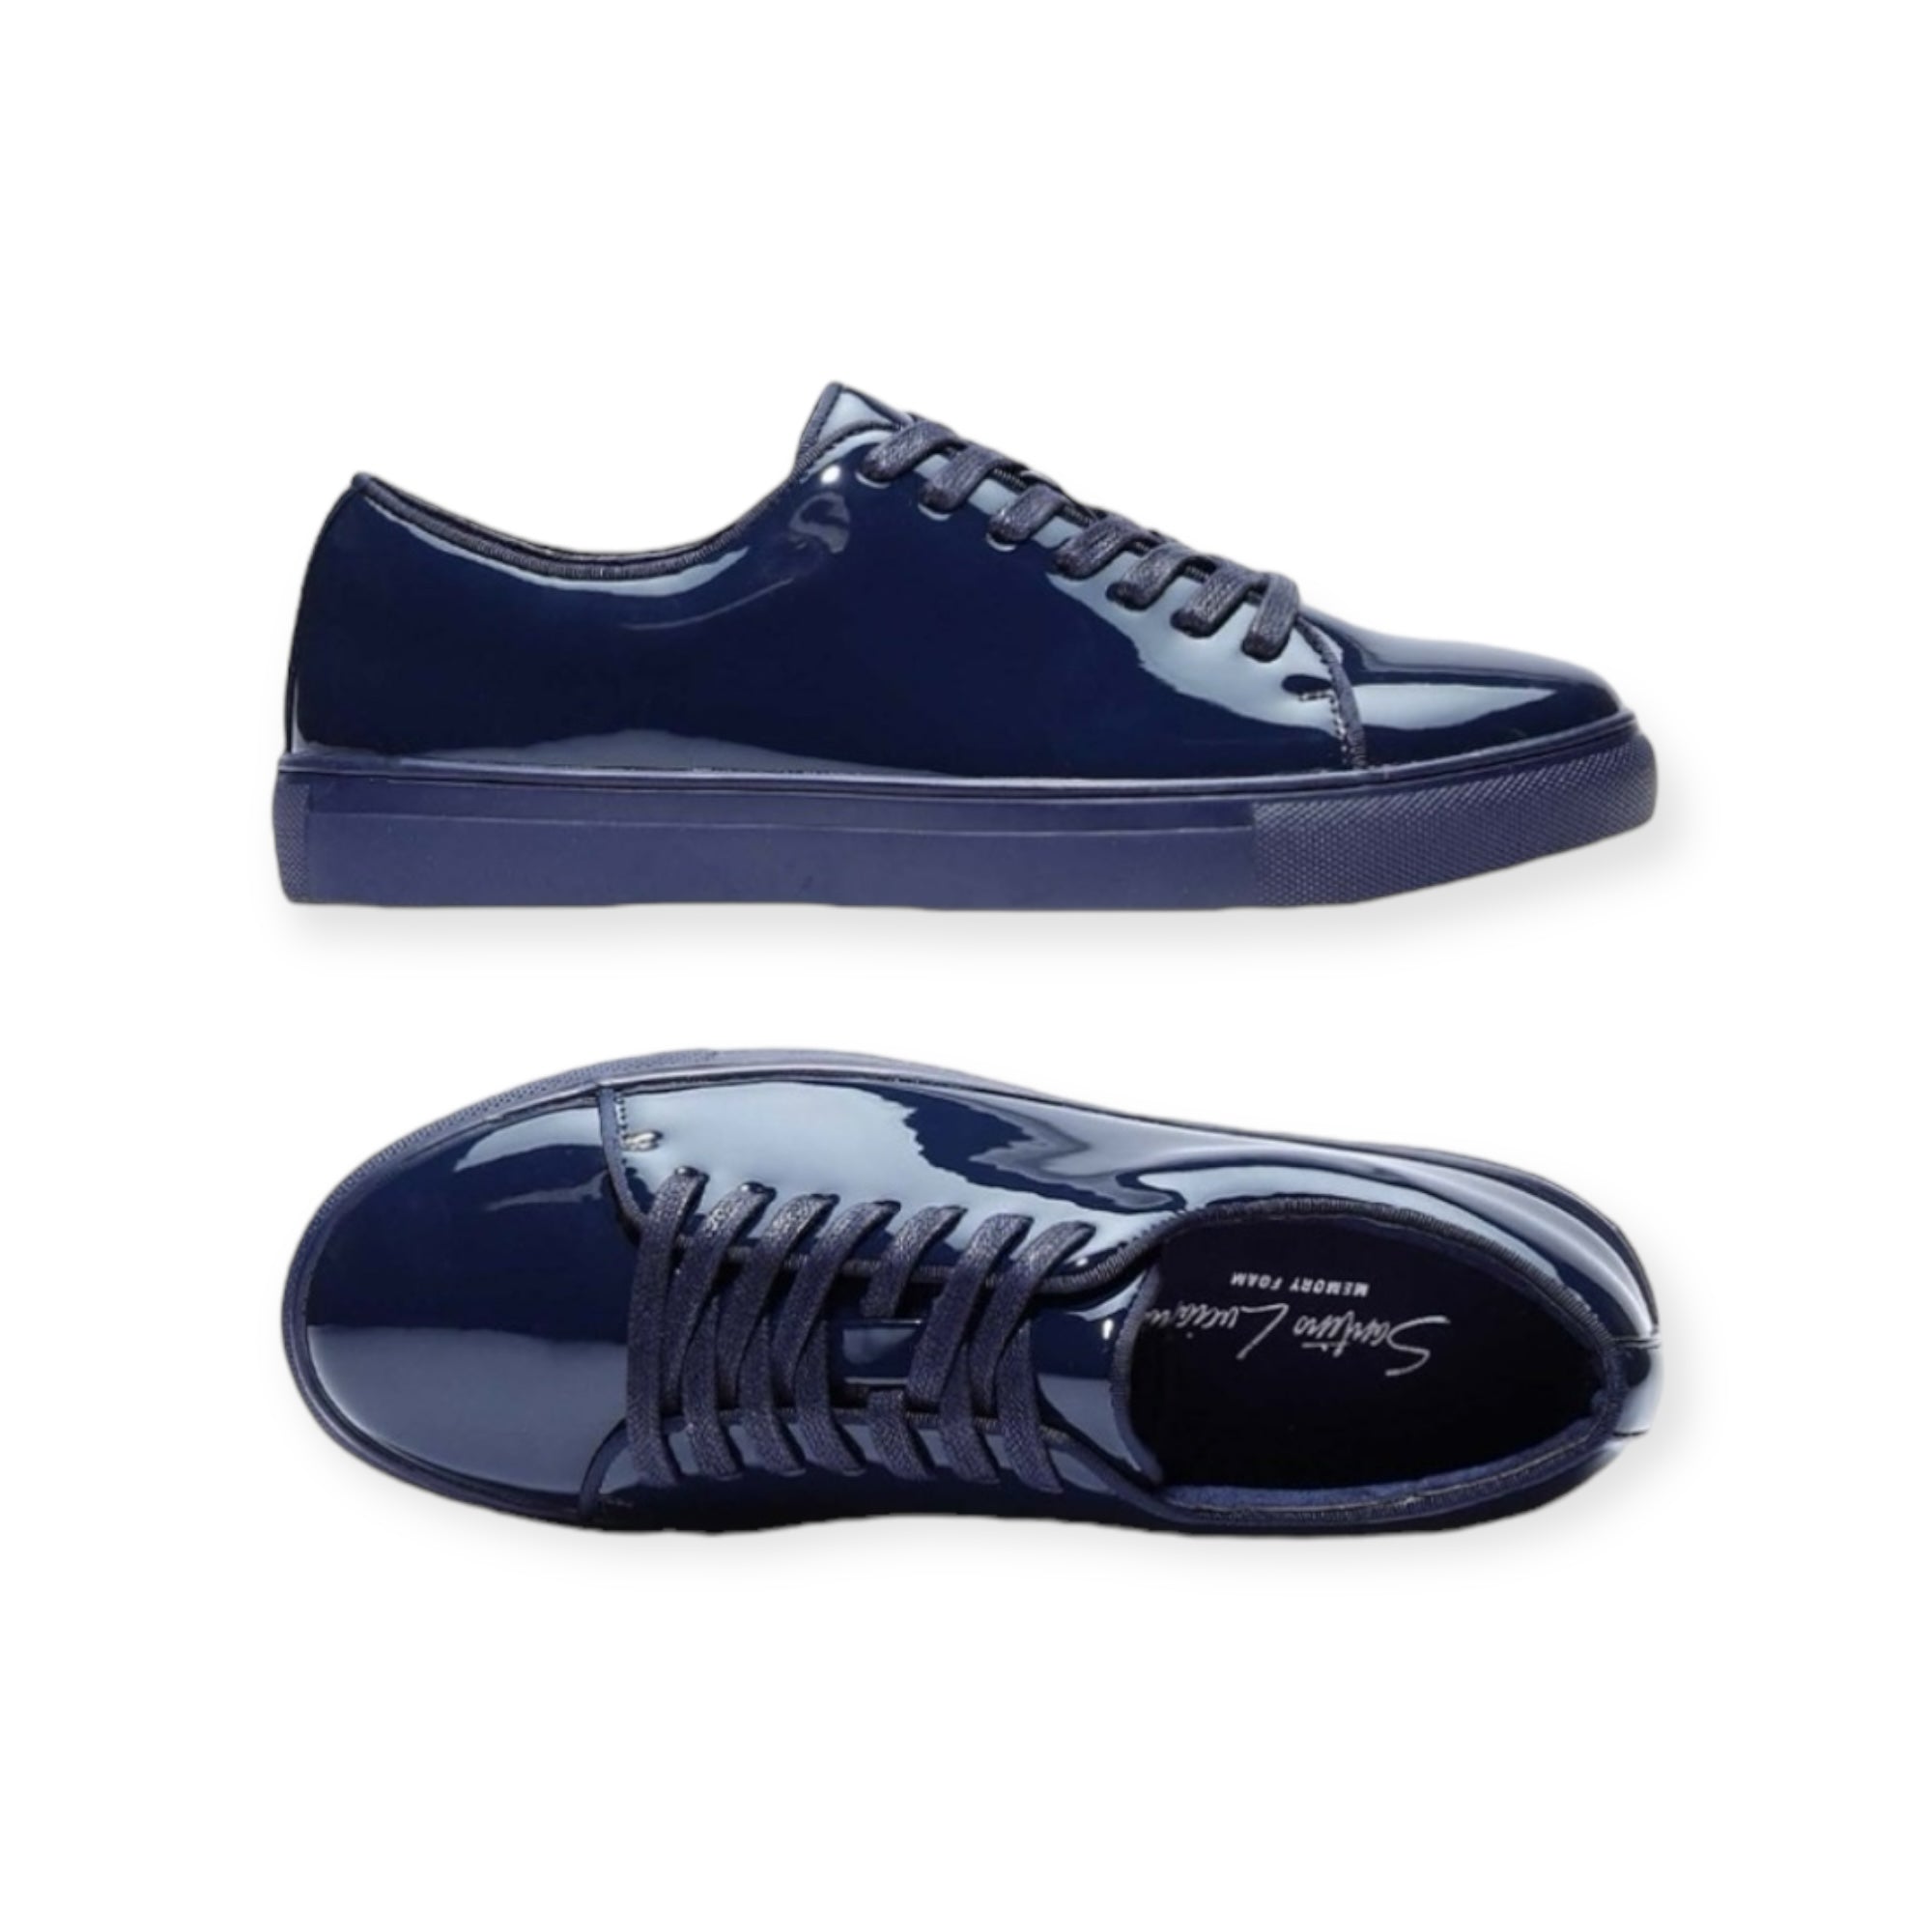 Mens Patent Leather Sneaker